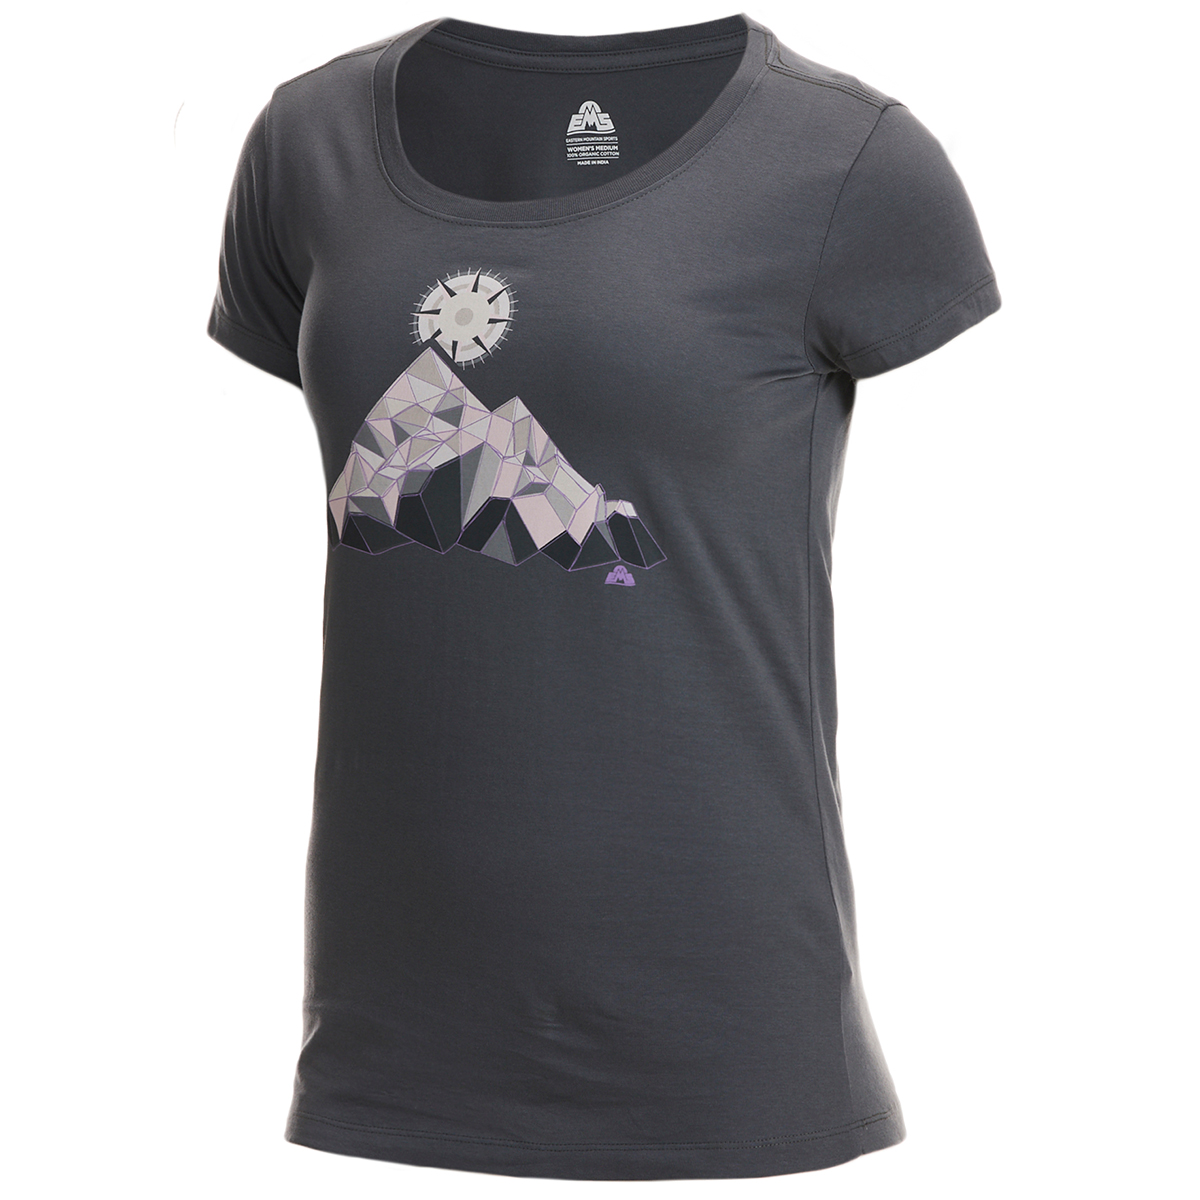 EMS Women's Multifaceted Short Sleeve Graphic Tee - Size M